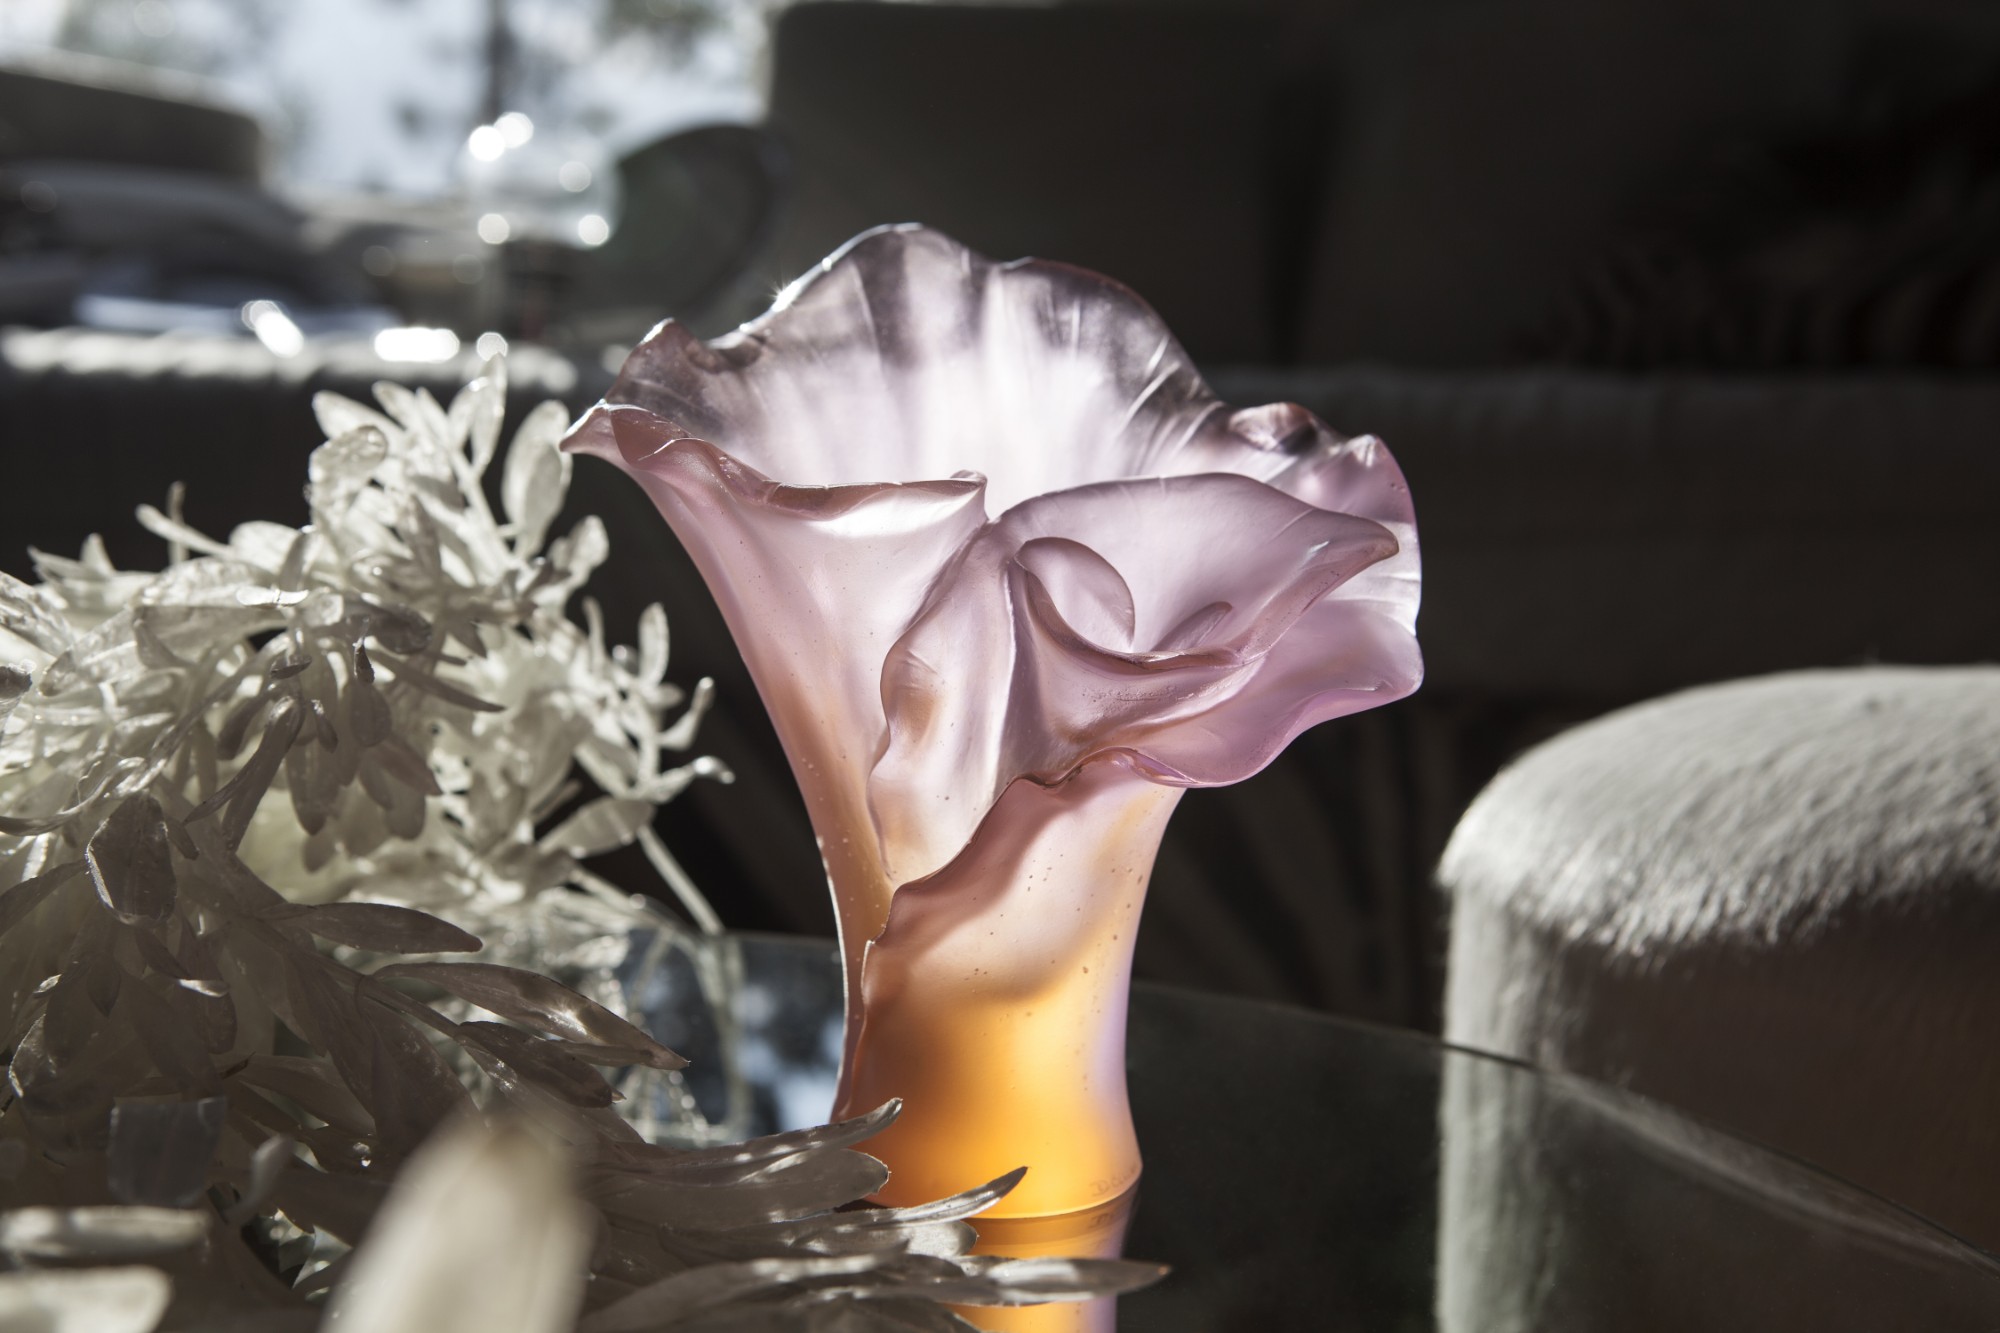 Floral style vase collection by Daum at Opulin